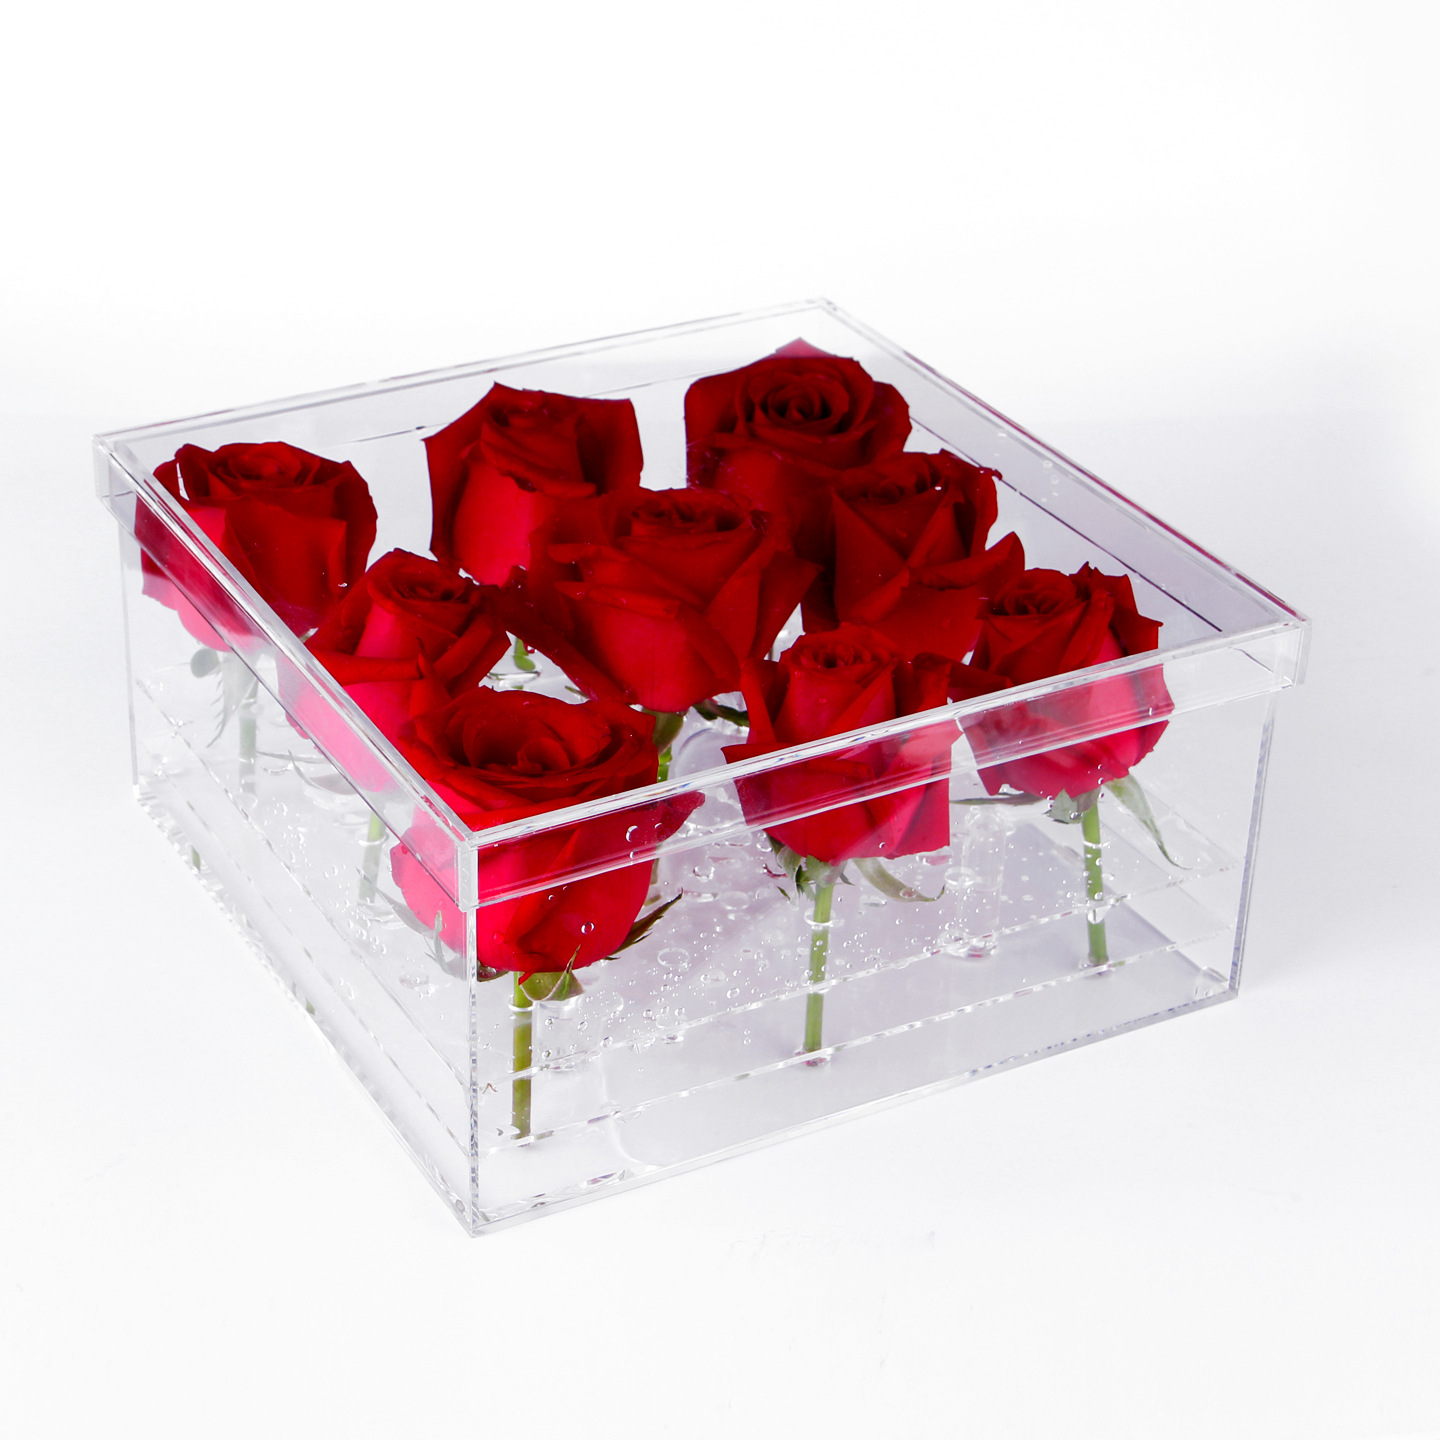 Acrylic box and packaging